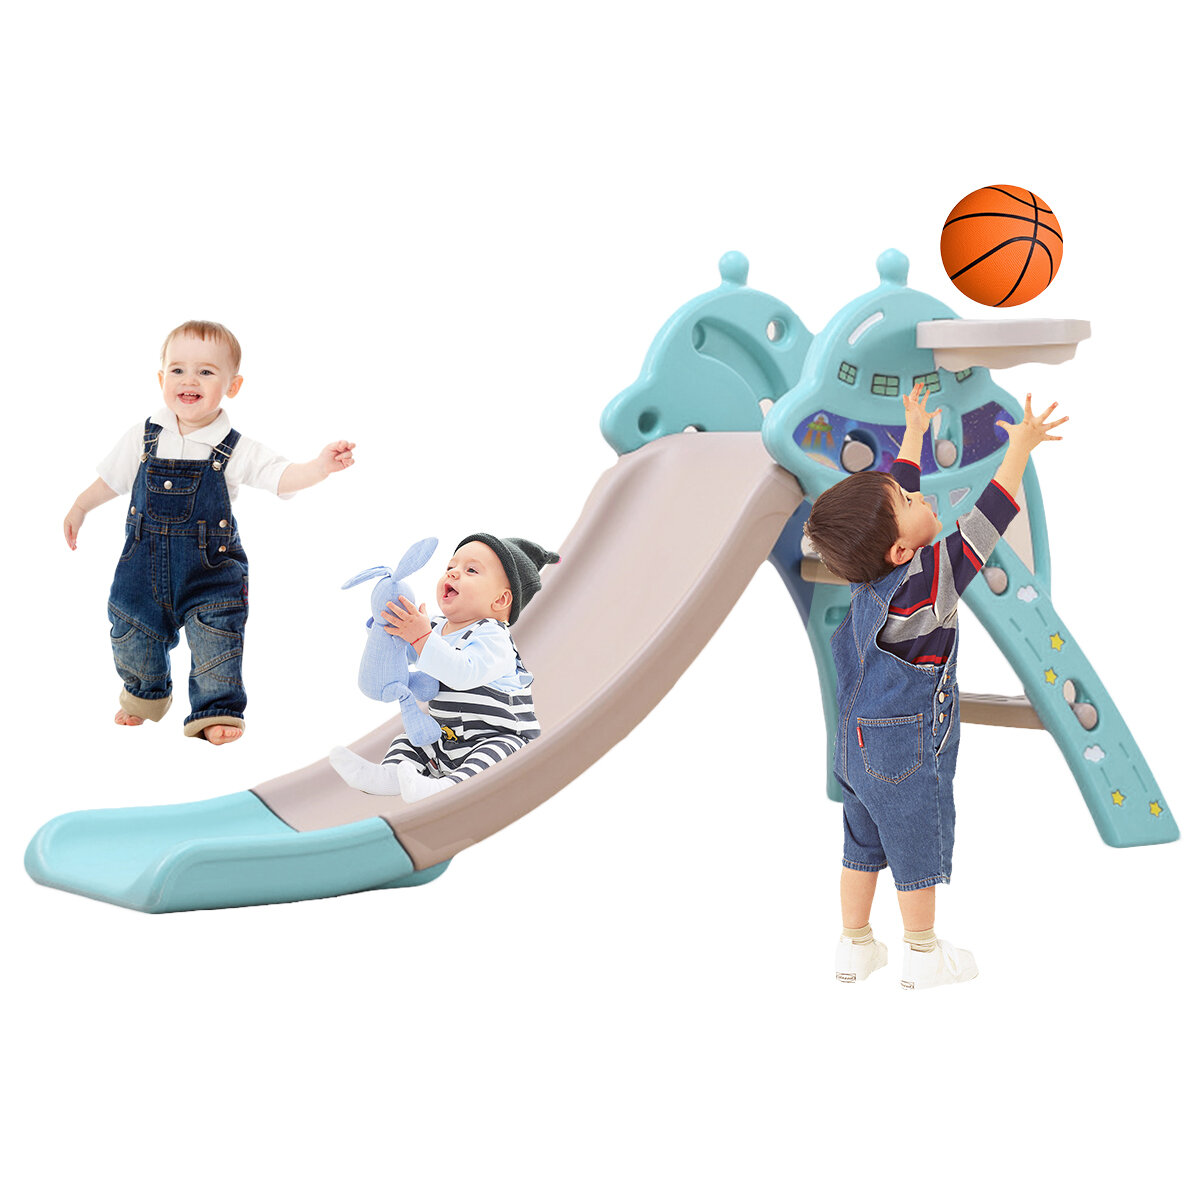 

3 IN 1 Toddler Slide and Swing Set Climber Slide Playset Equipped with Climbing Ladder Slide Basketball Hoop Christmas G